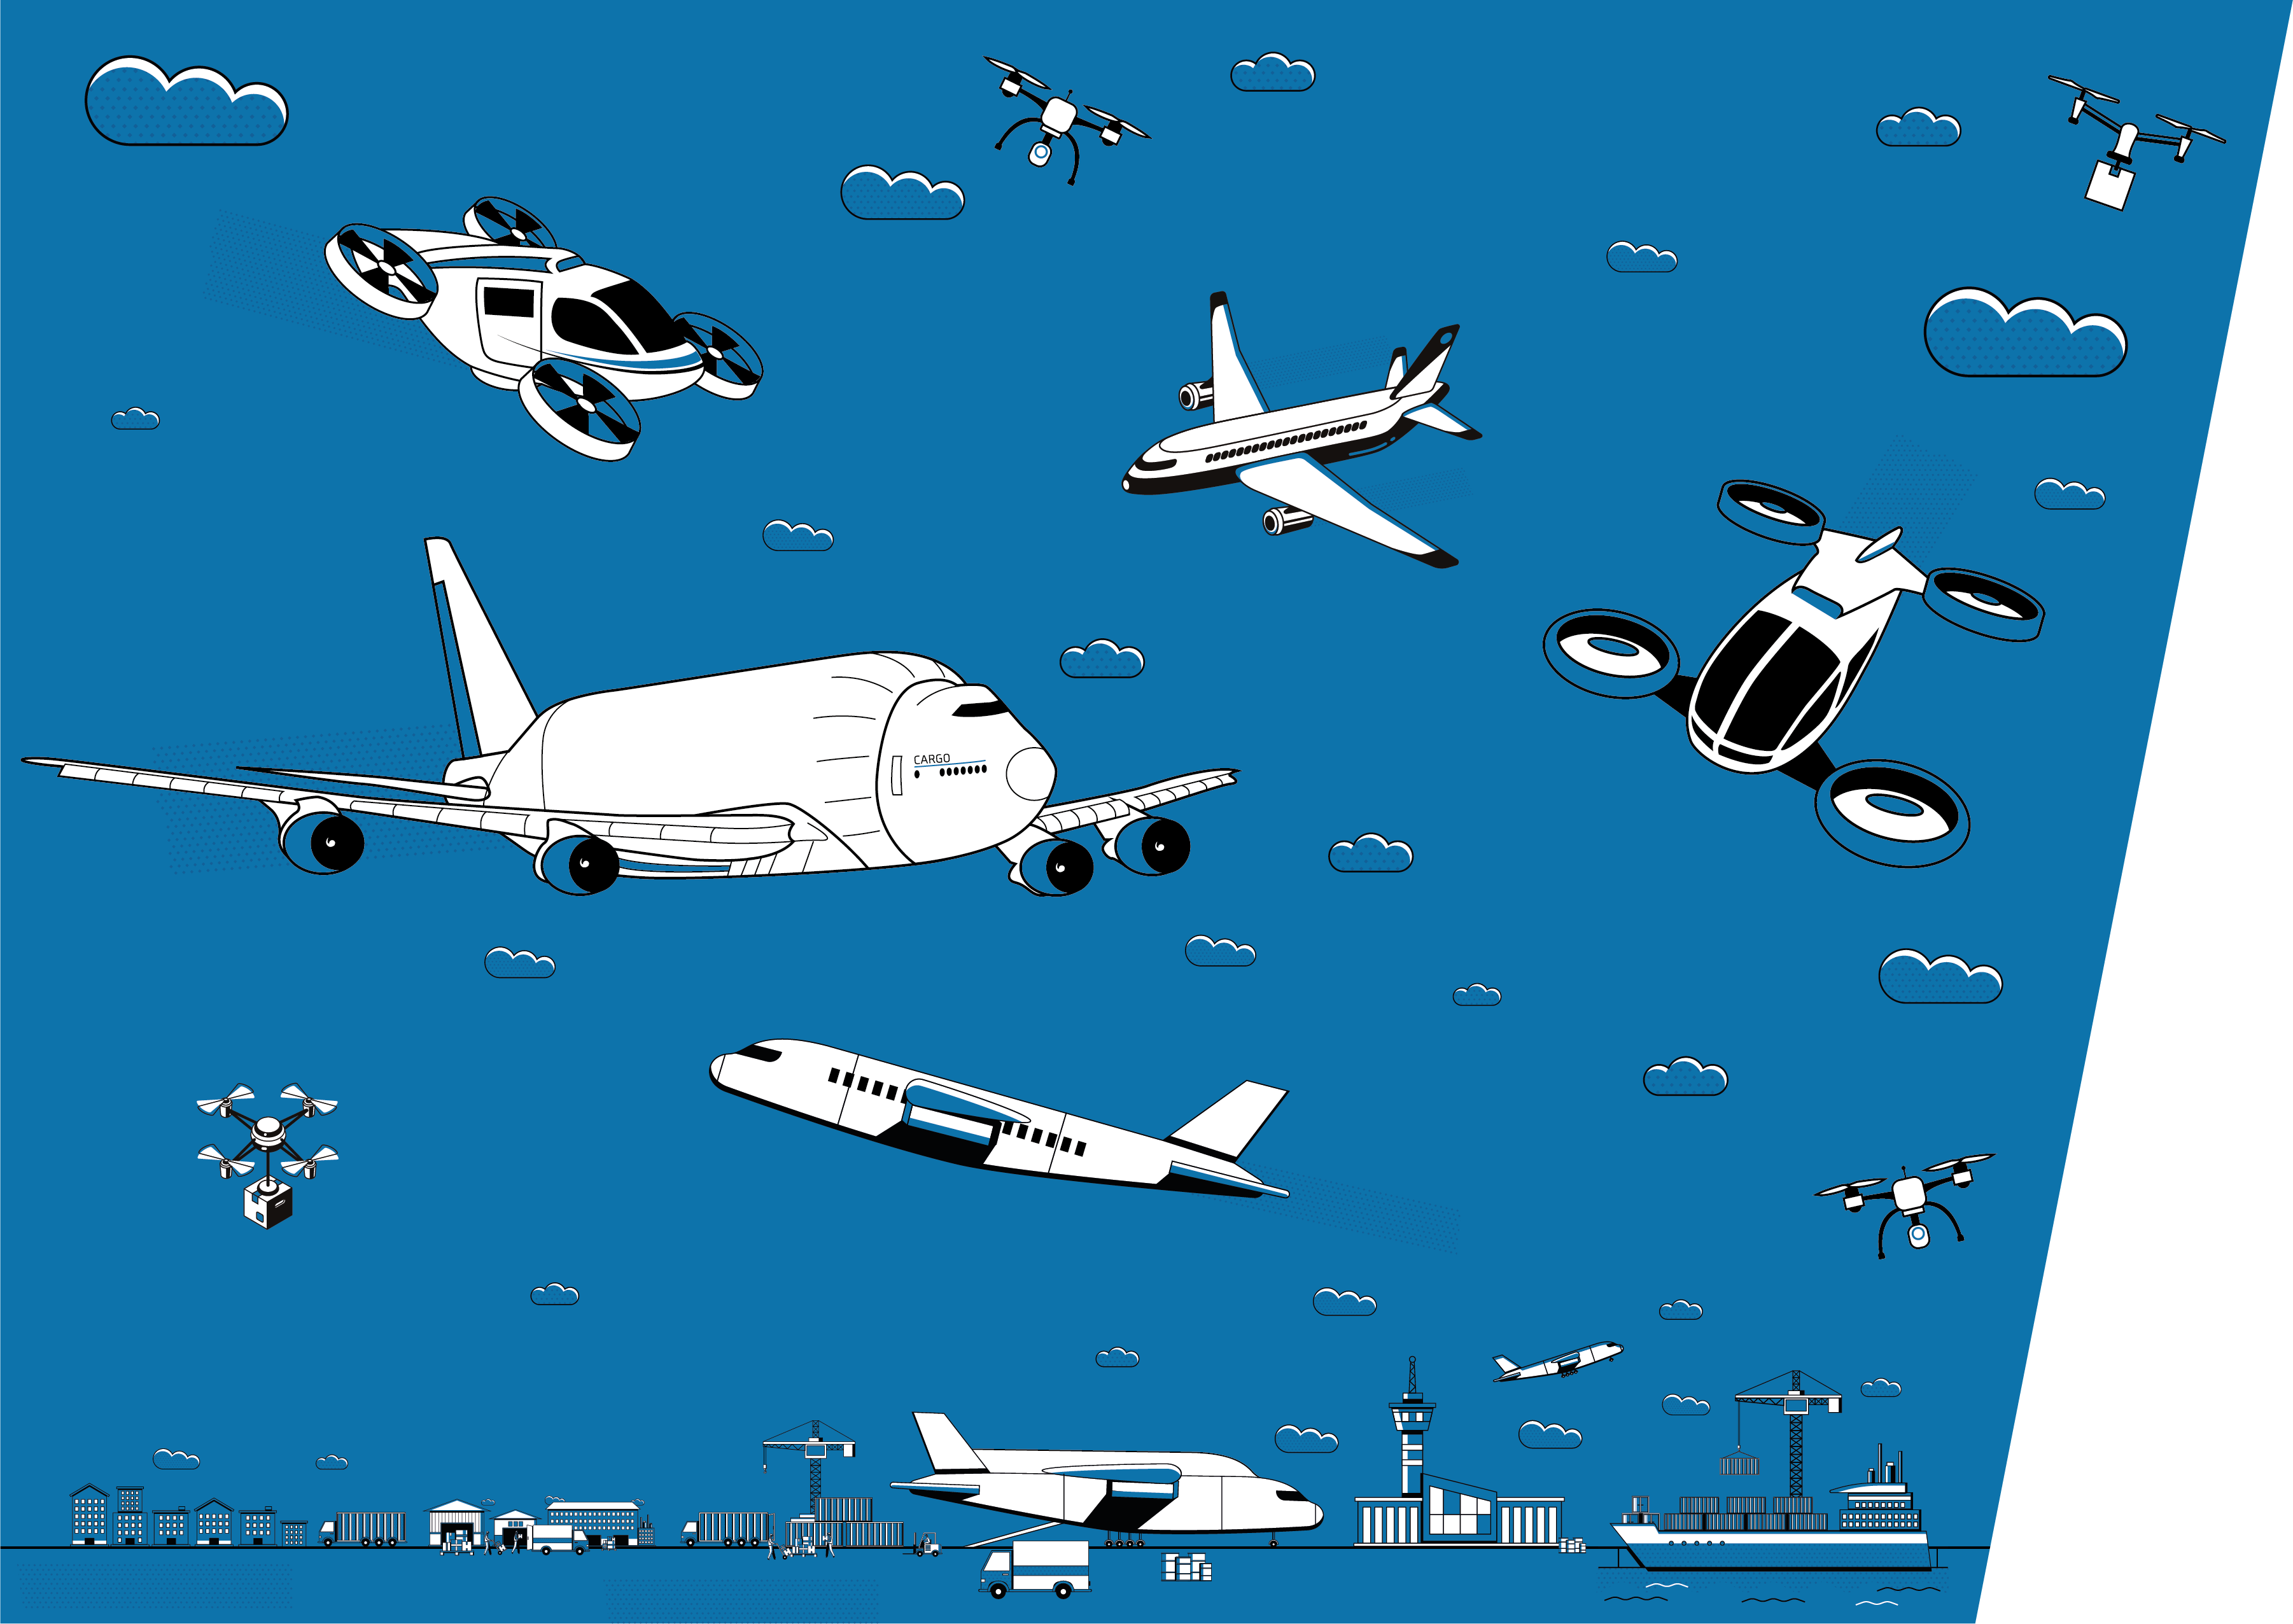 Airplanes and other modes of transportation